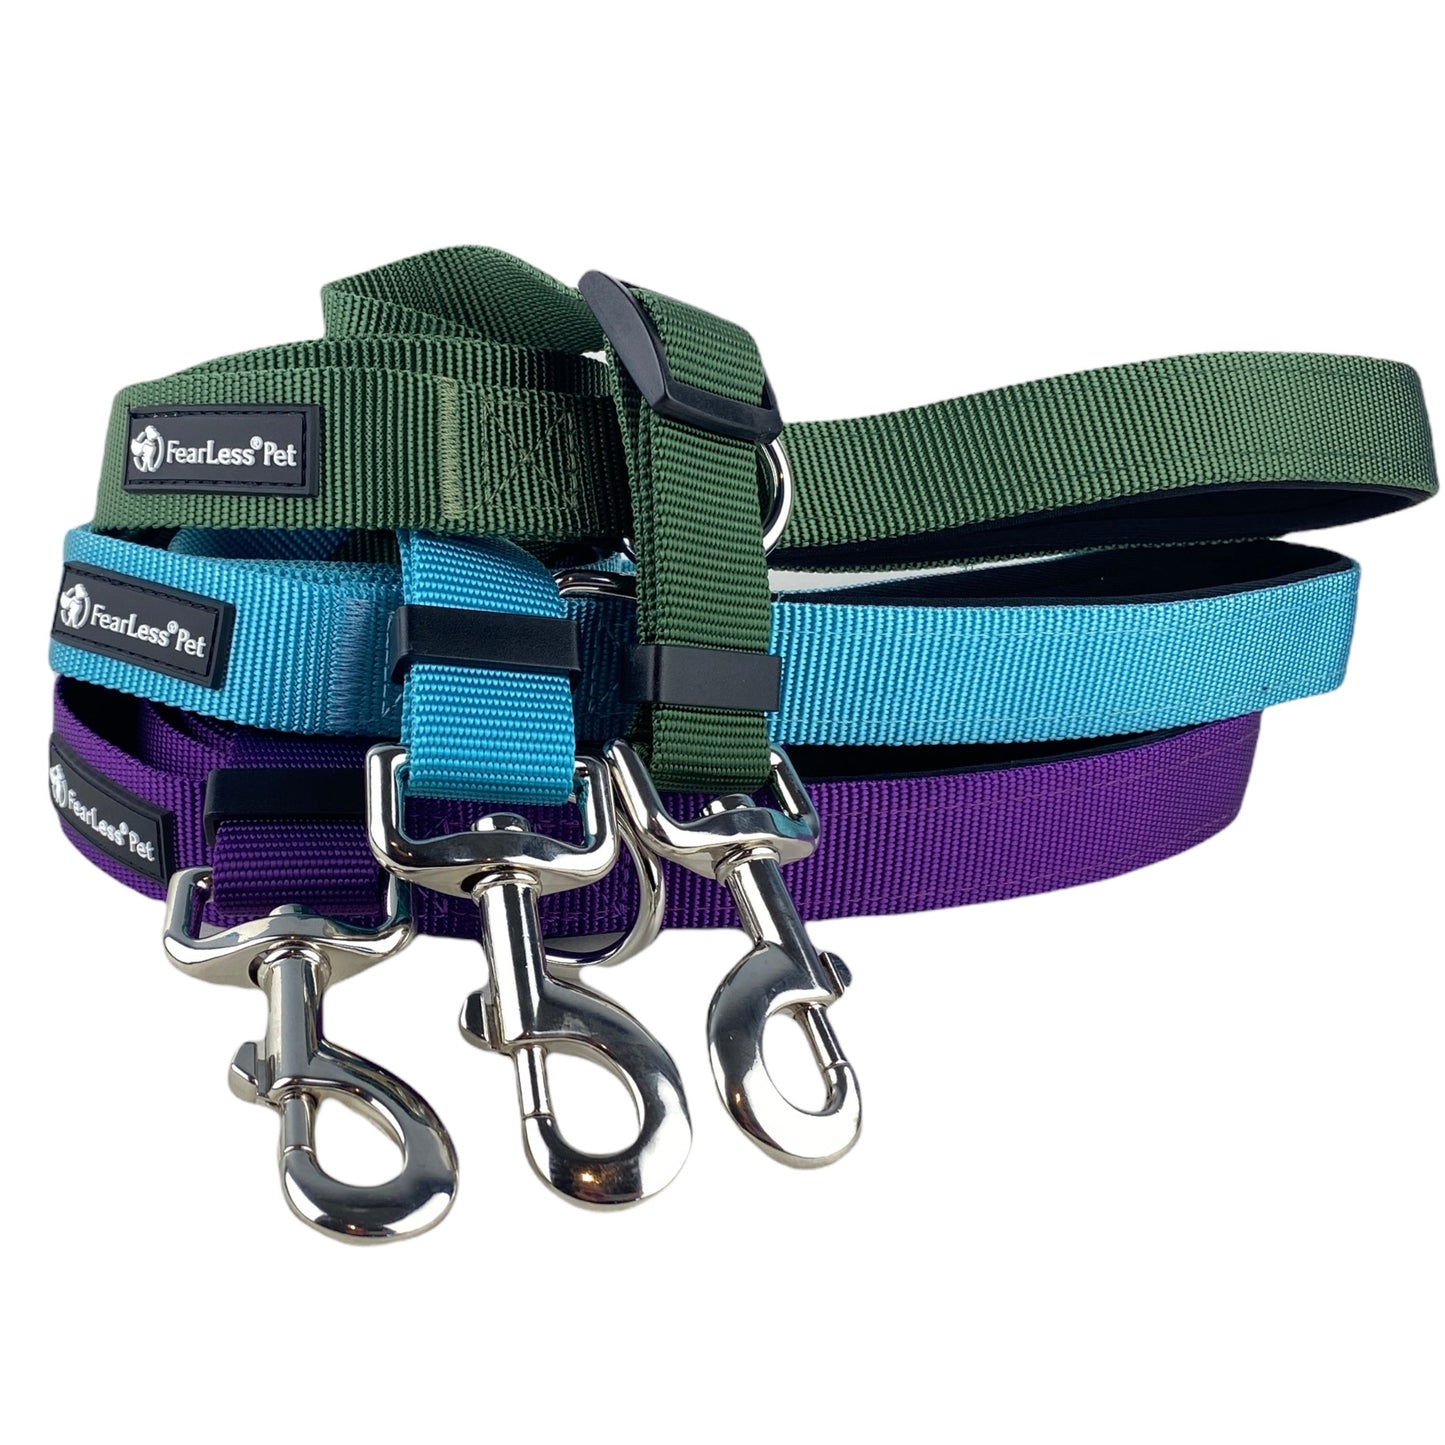 a photo of three adjustable leashes rolled up and stacked against a white background the leashes are green, teal blue and purple